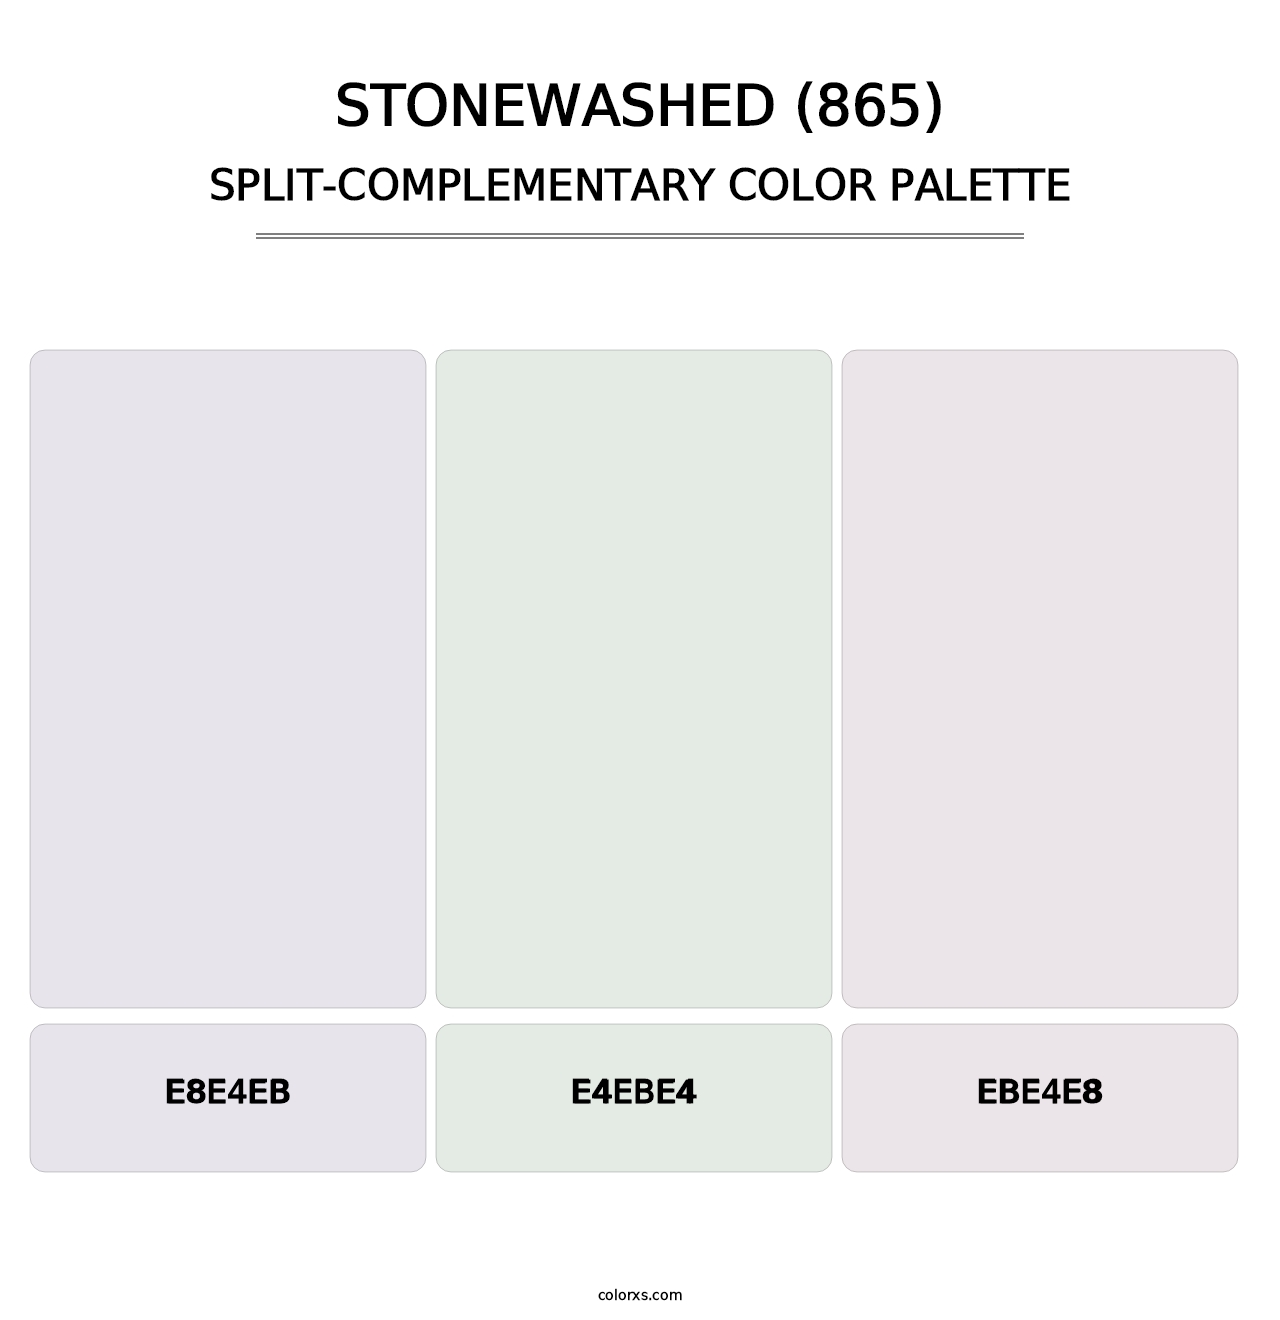 Stonewashed (865) - Split-Complementary Color Palette